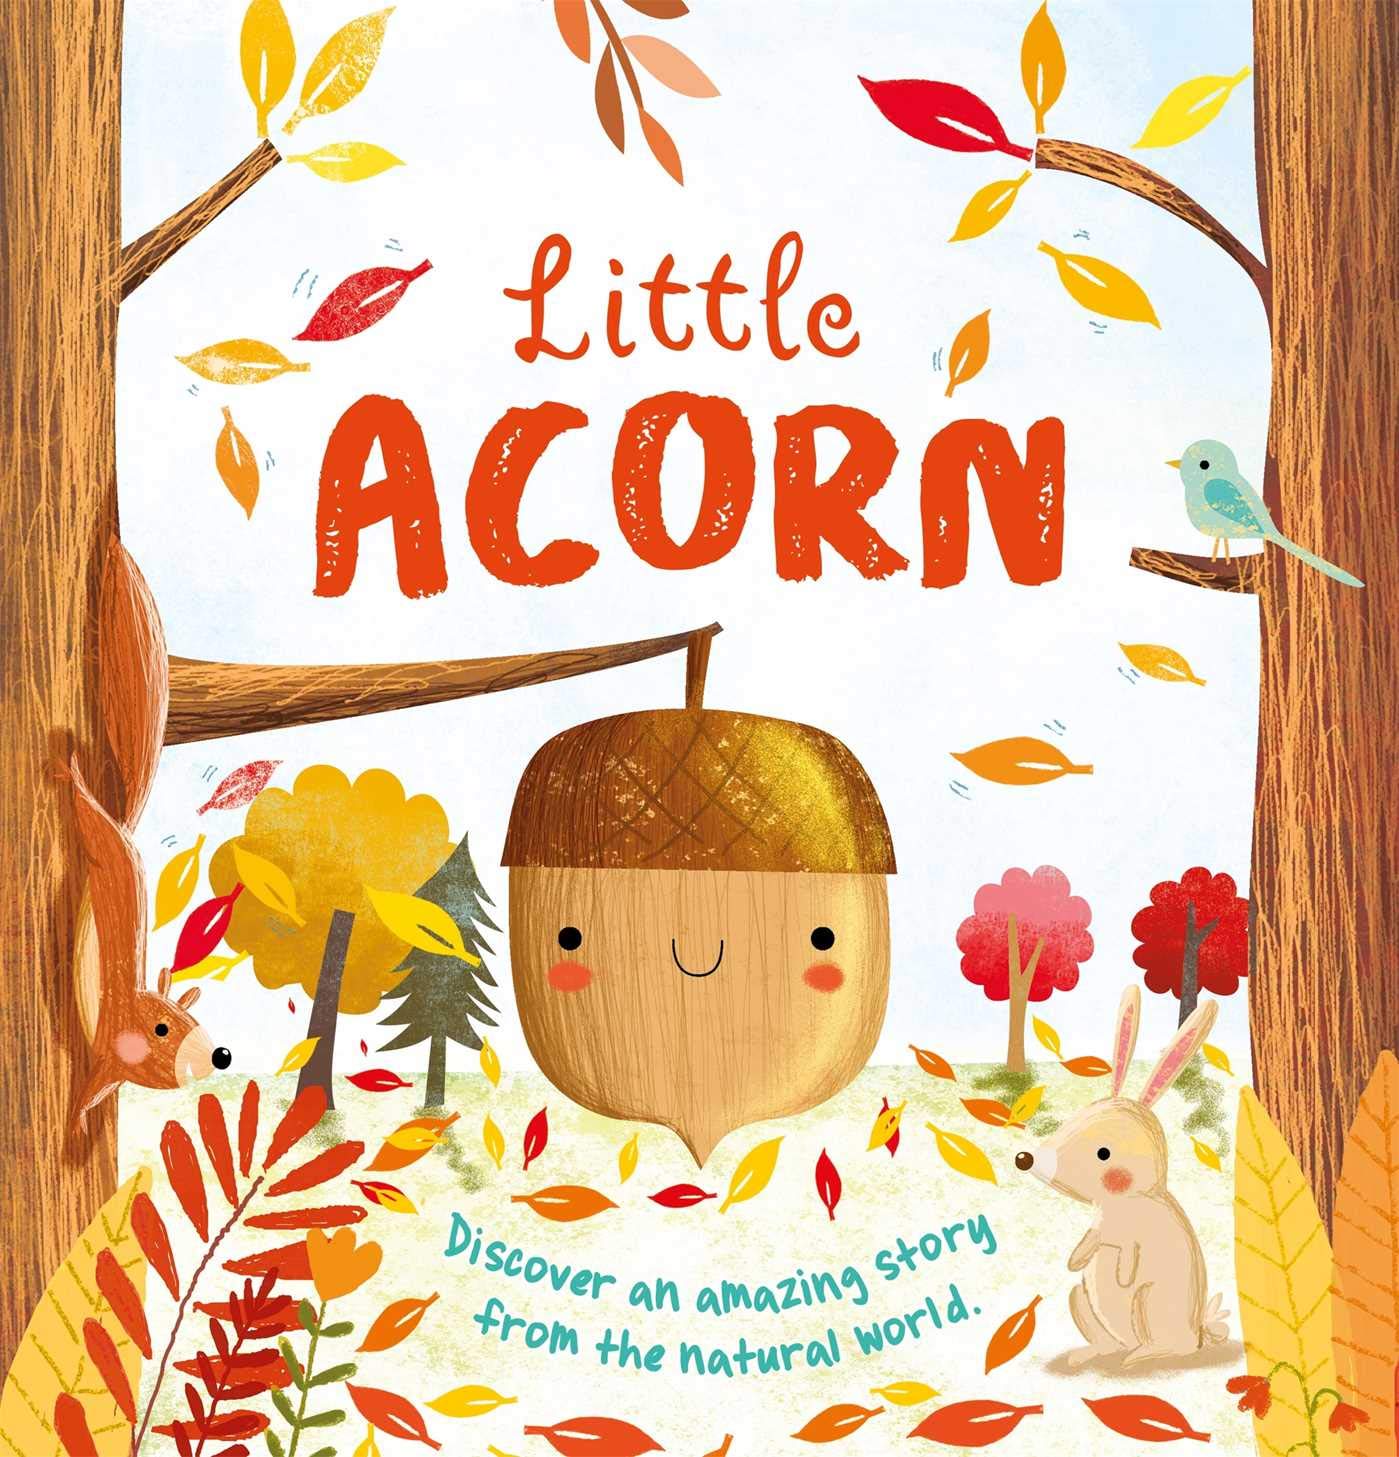 speech and language teaching concepts for Nature Stories: Little Acorn in speech therapy​ ​